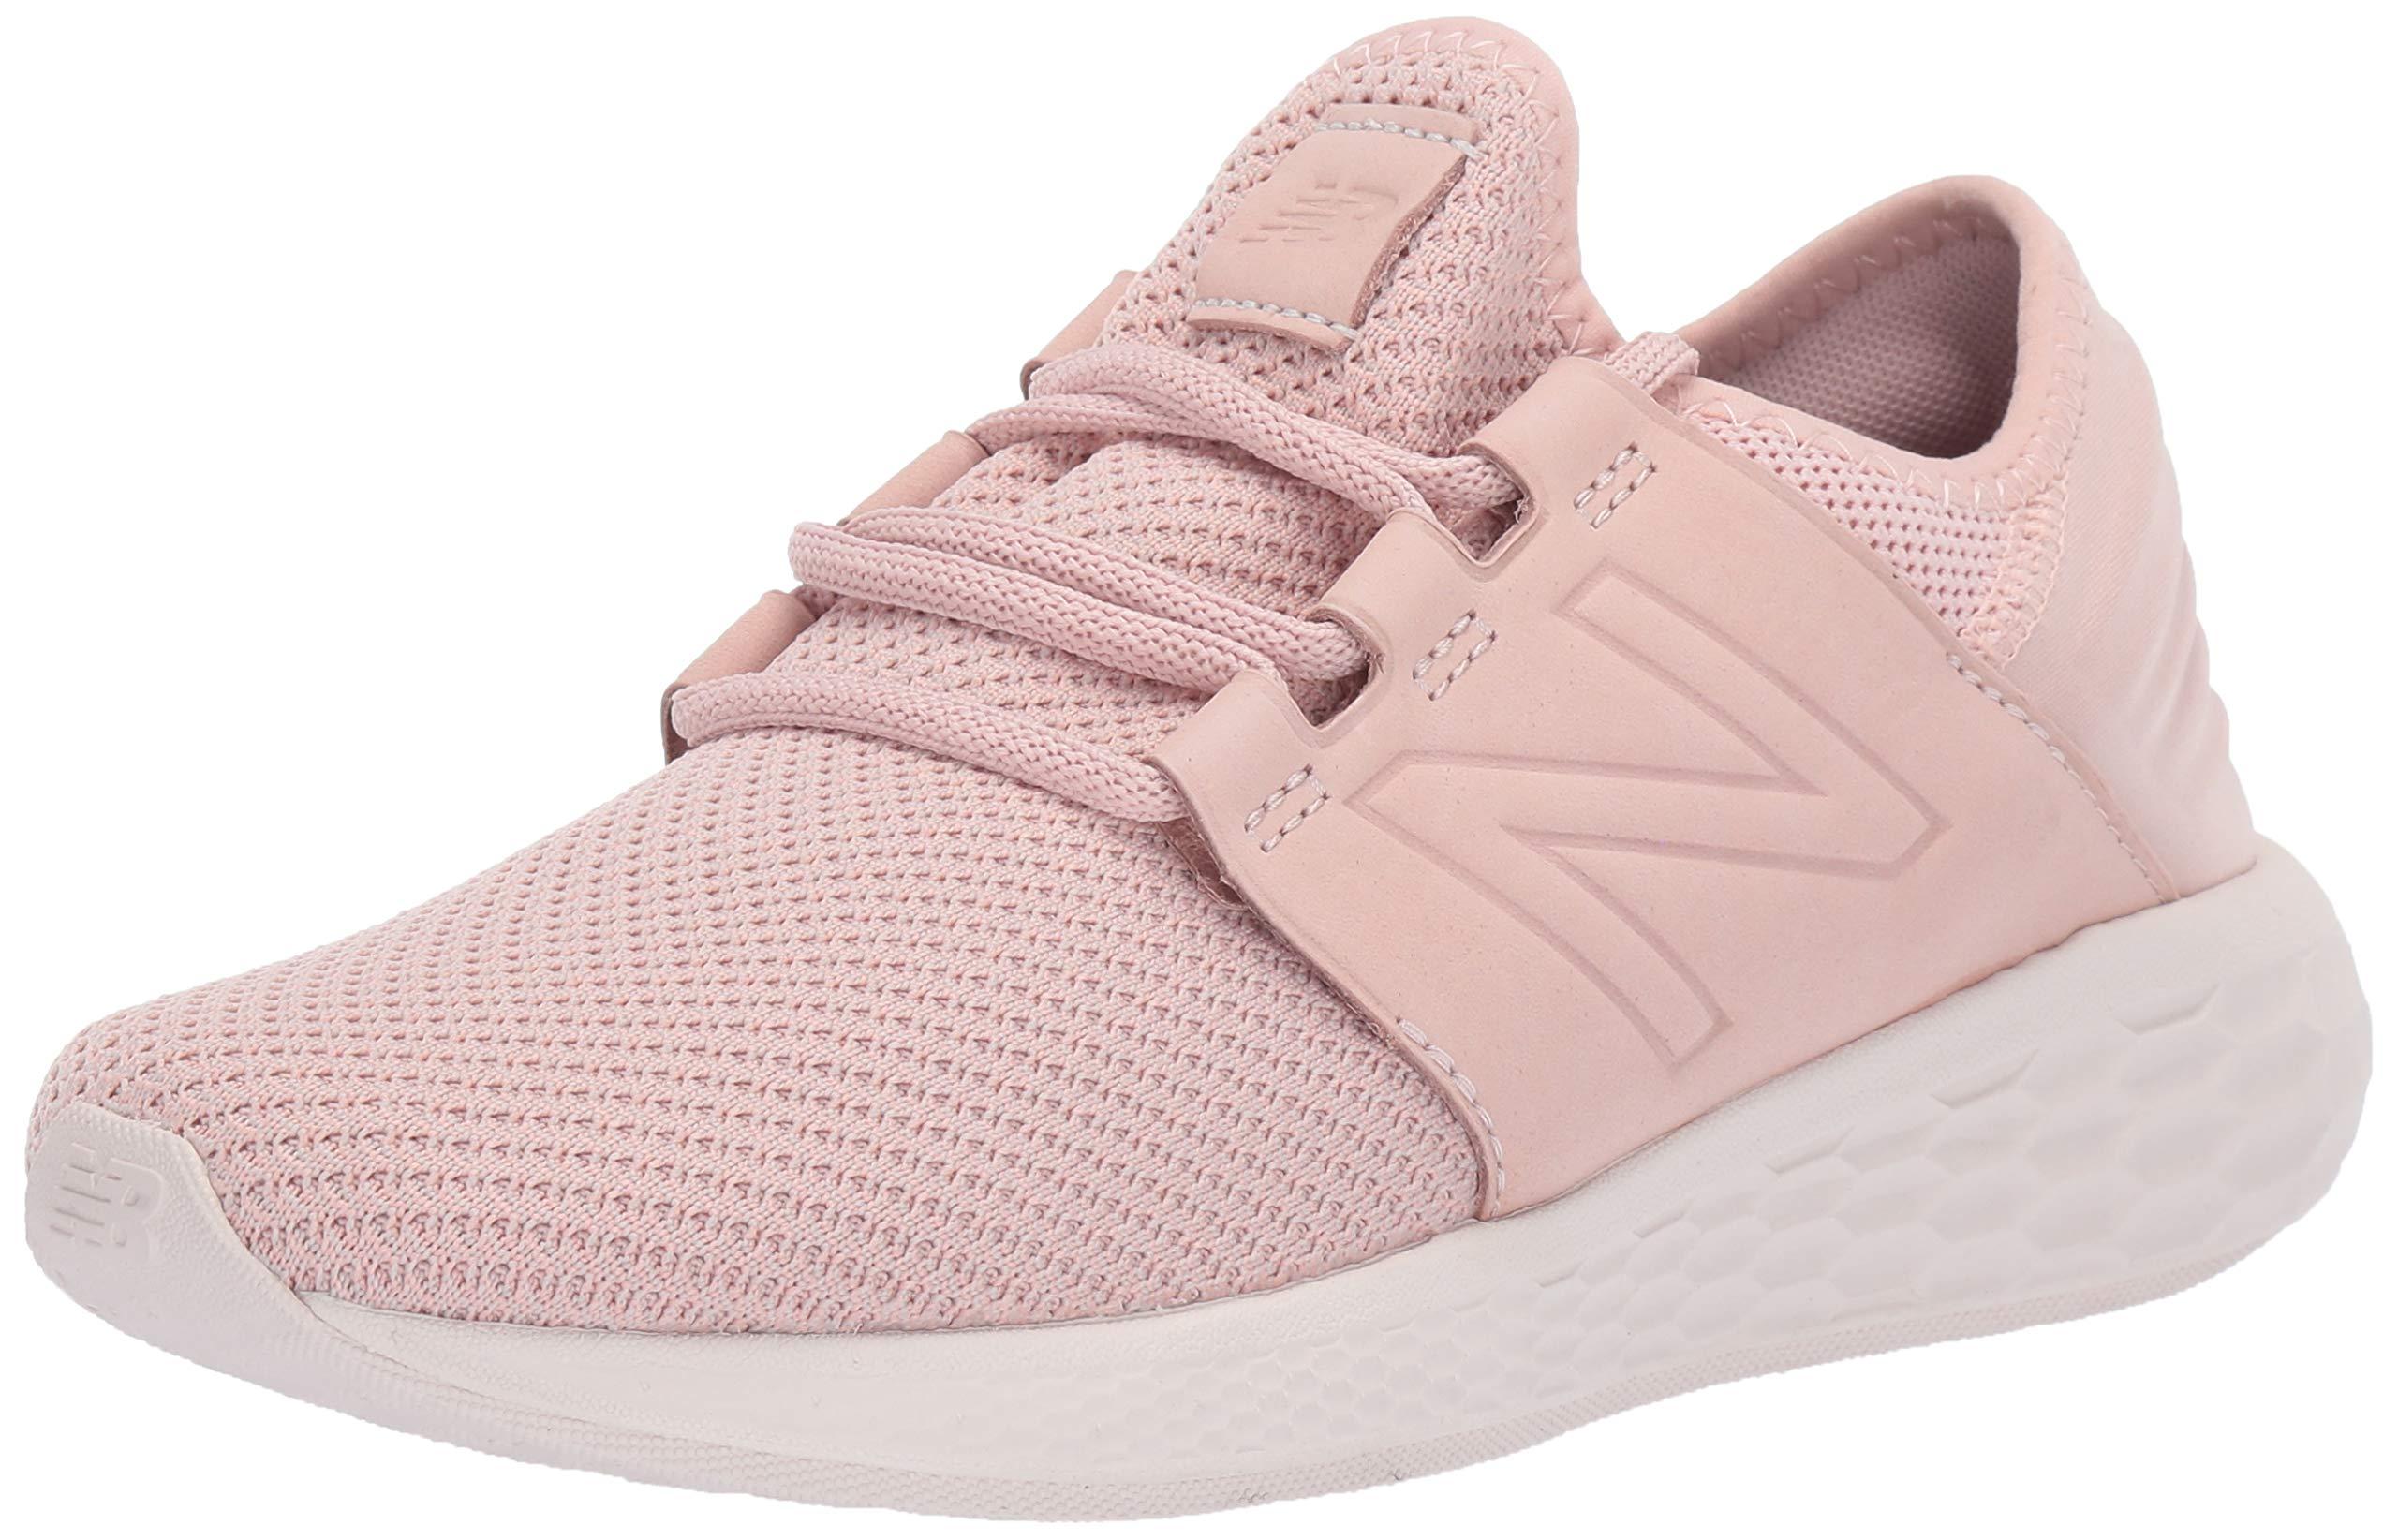 New Balance Leather Fresh Foam Cruz V2 Deconstructed Running Shoes in  Oyster Pink/Pink (Pink) - Save 45% - Lyst